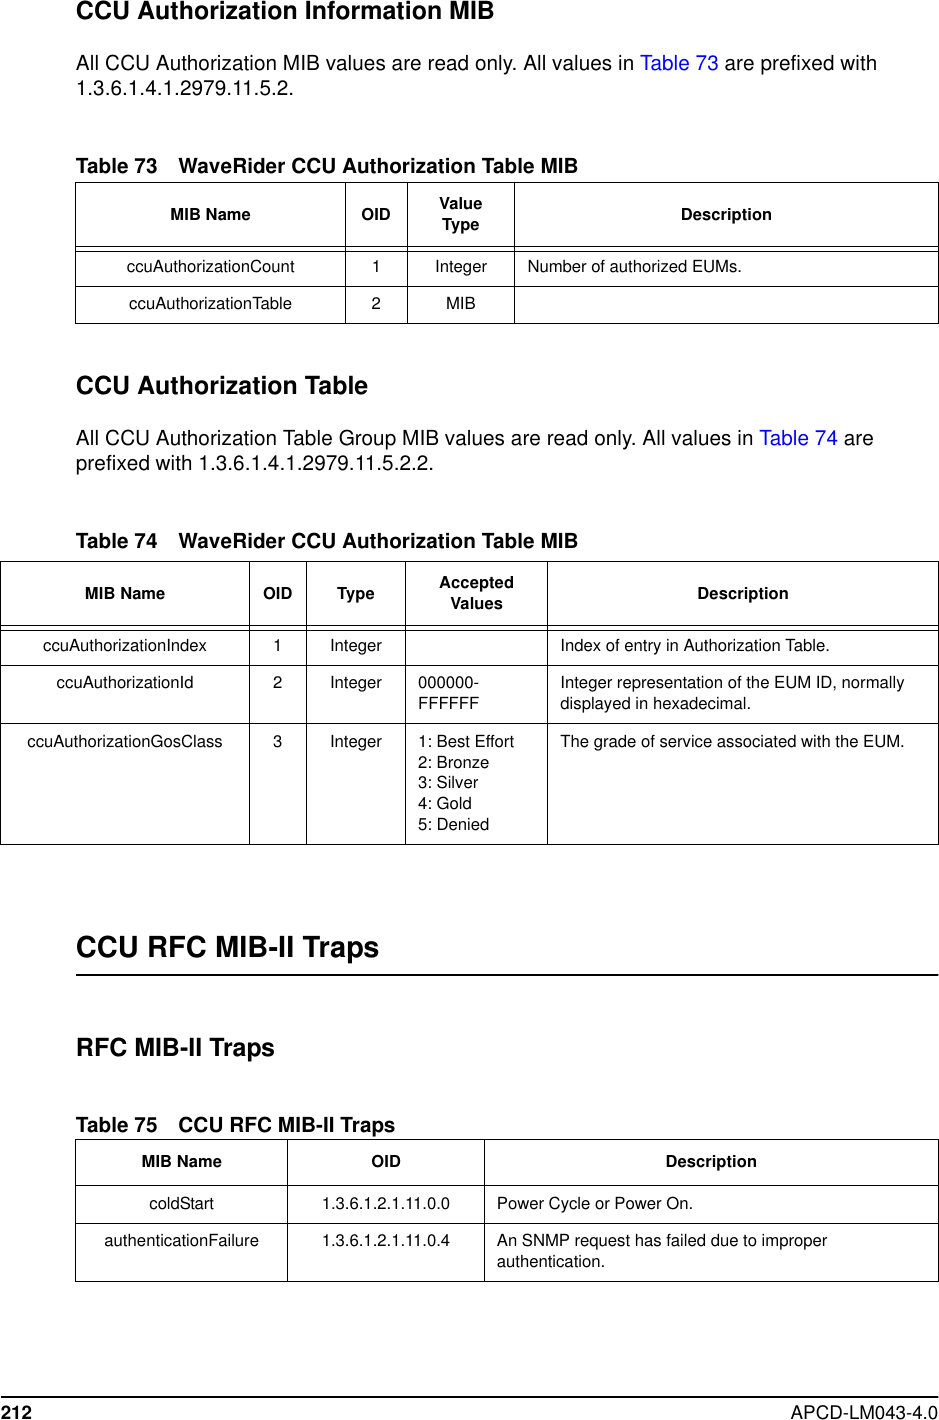 212 APCD-LM043-4.0CCU Authorization Information MIBAll CCU Authorization MIB values are read only. All values in Table 73 are prefixed with1.3.6.1.4.1.2979.11.5.2.Table 73 WaveRider CCU Authorization Table MIBCCU Authorization TableAll CCU Authorization Table Group MIB values are read only. All values in Table 74 areprefixed with 1.3.6.1.4.1.2979.11.5.2.2.Table 74 WaveRider CCU Authorization Table MIBCCU RFC MIB-II TrapsRFC MIB-II TrapsTable 75 CCU RFC MIB-II TrapsMIB Name OID ValueType DescriptionccuAuthorizationCount 1 Integer Number of authorized EUMs.ccuAuthorizationTable 2MIBMIB Name OID Type AcceptedValues DescriptionccuAuthorizationIndex 1 Integer Index of entry in Authorization Table.ccuAuthorizationId 2Integer 000000-FFFFFFInteger representation of the EUM ID, normallydisplayed in hexadecimal.ccuAuthorizationGosClass 3Integer 1: Best Effort2: Bronze3: Silver4: Gold5: DeniedThe grade of service associated with the EUM.MIB Name OID DescriptioncoldStart 1.3.6.1.2.1.11.0.0 PowerCycleorPowerOn.authenticationFailure 1.3.6.1.2.1.11.0.4 An SNMP request has failed due to improperauthentication.